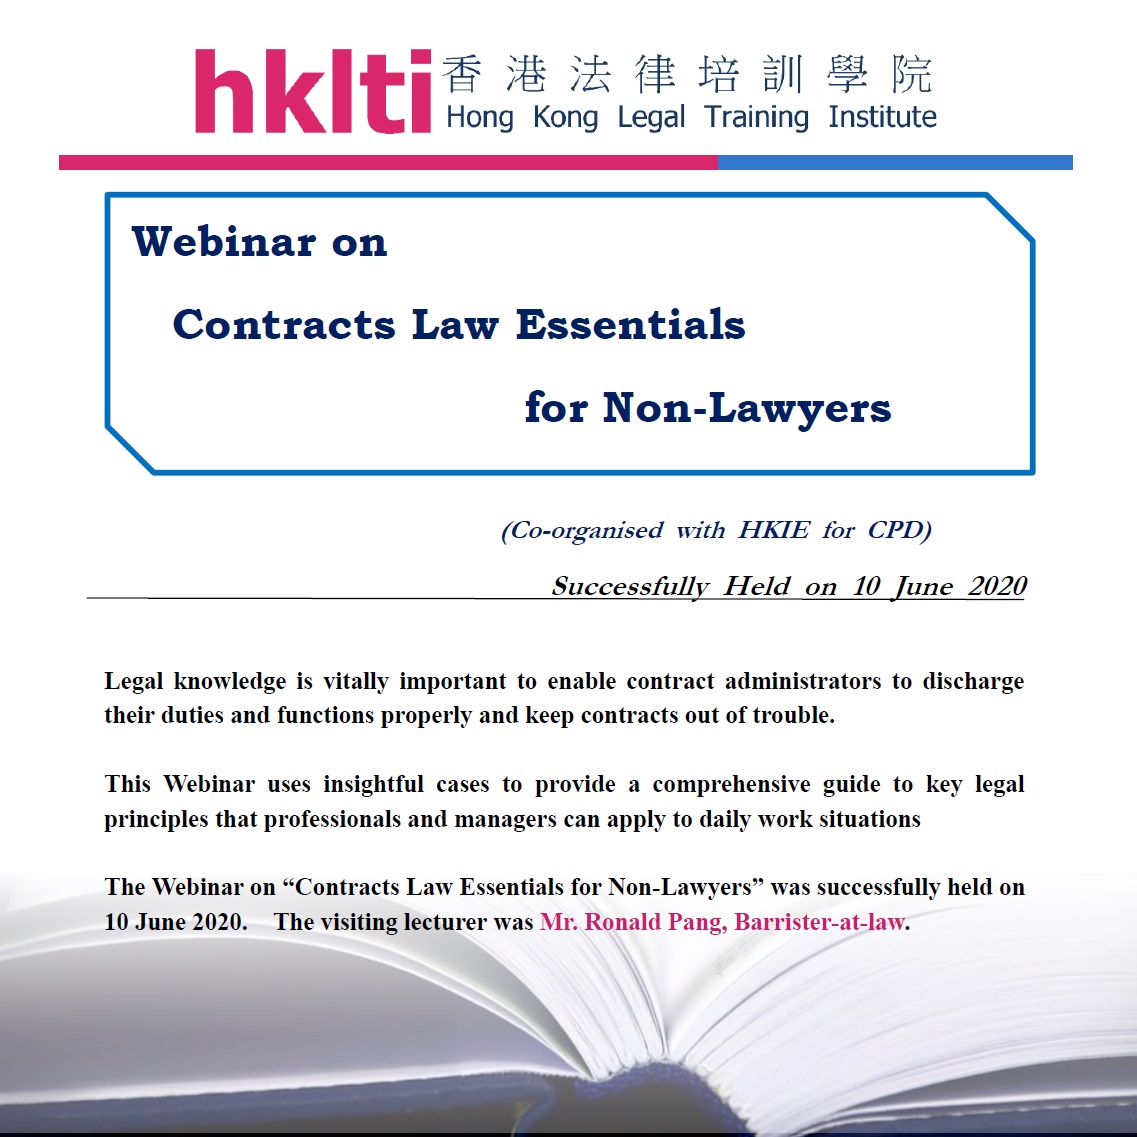 hklti hkie webinar contracts law essentials for non lawyers seminar report 20200610